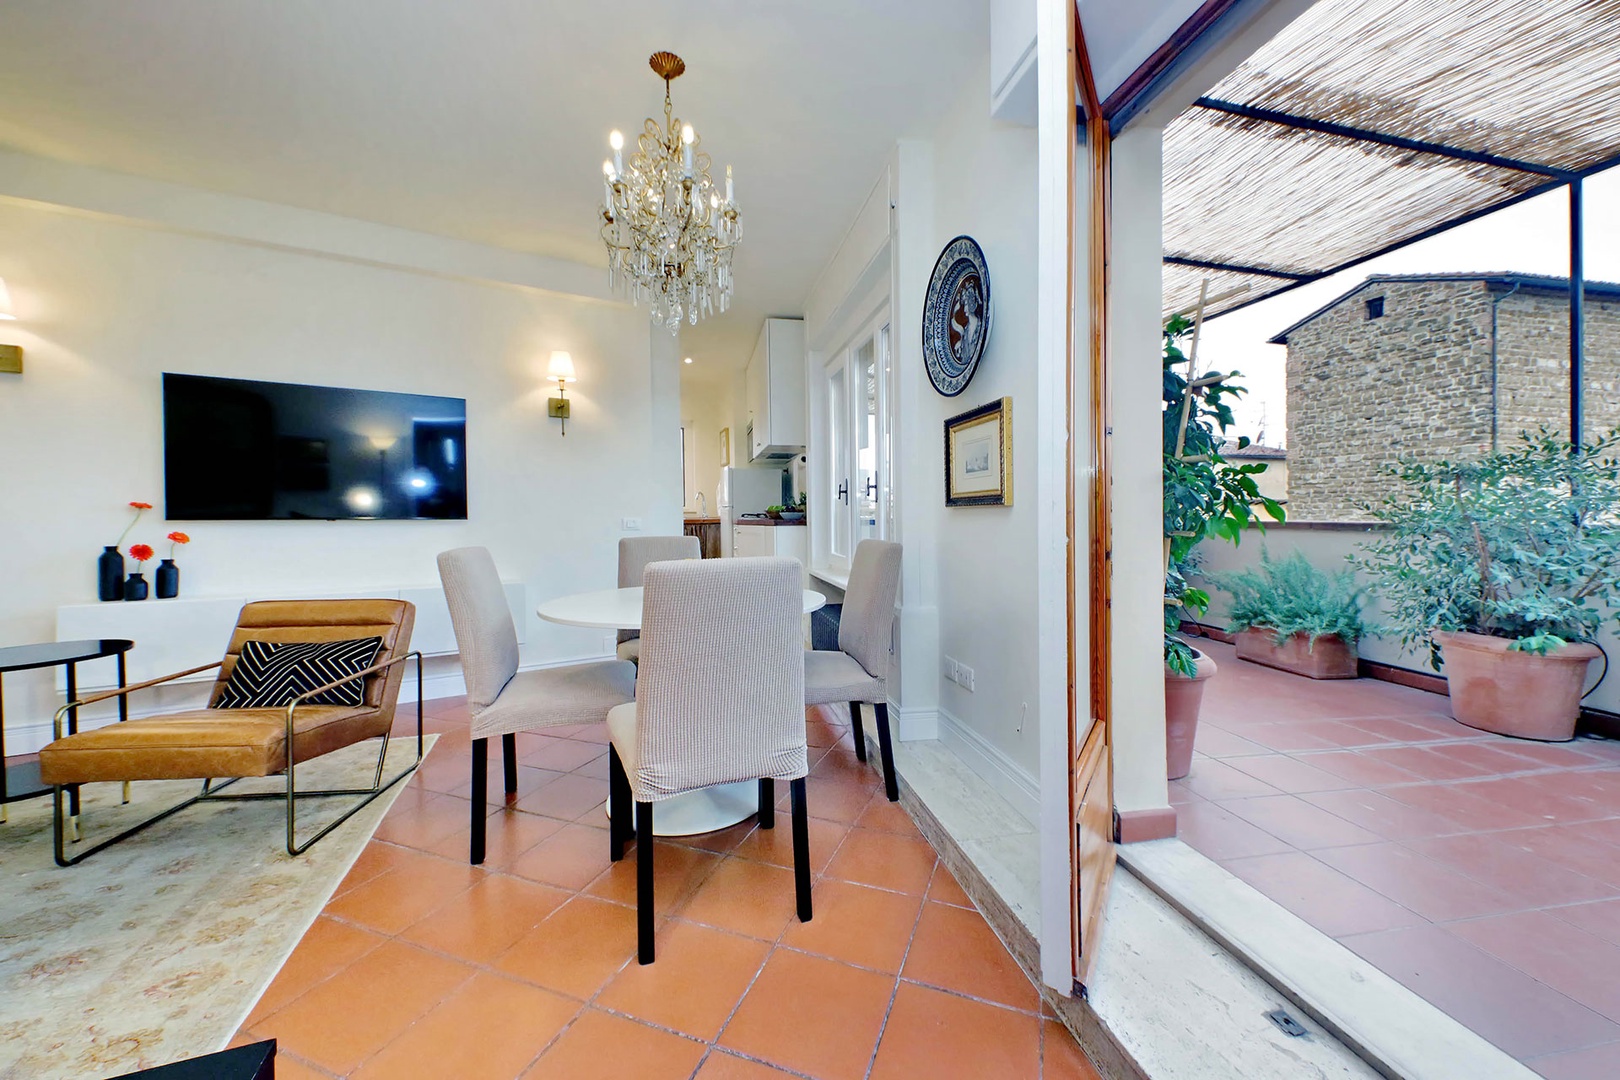 Large French doors open off the dining area to the expansive terrace.